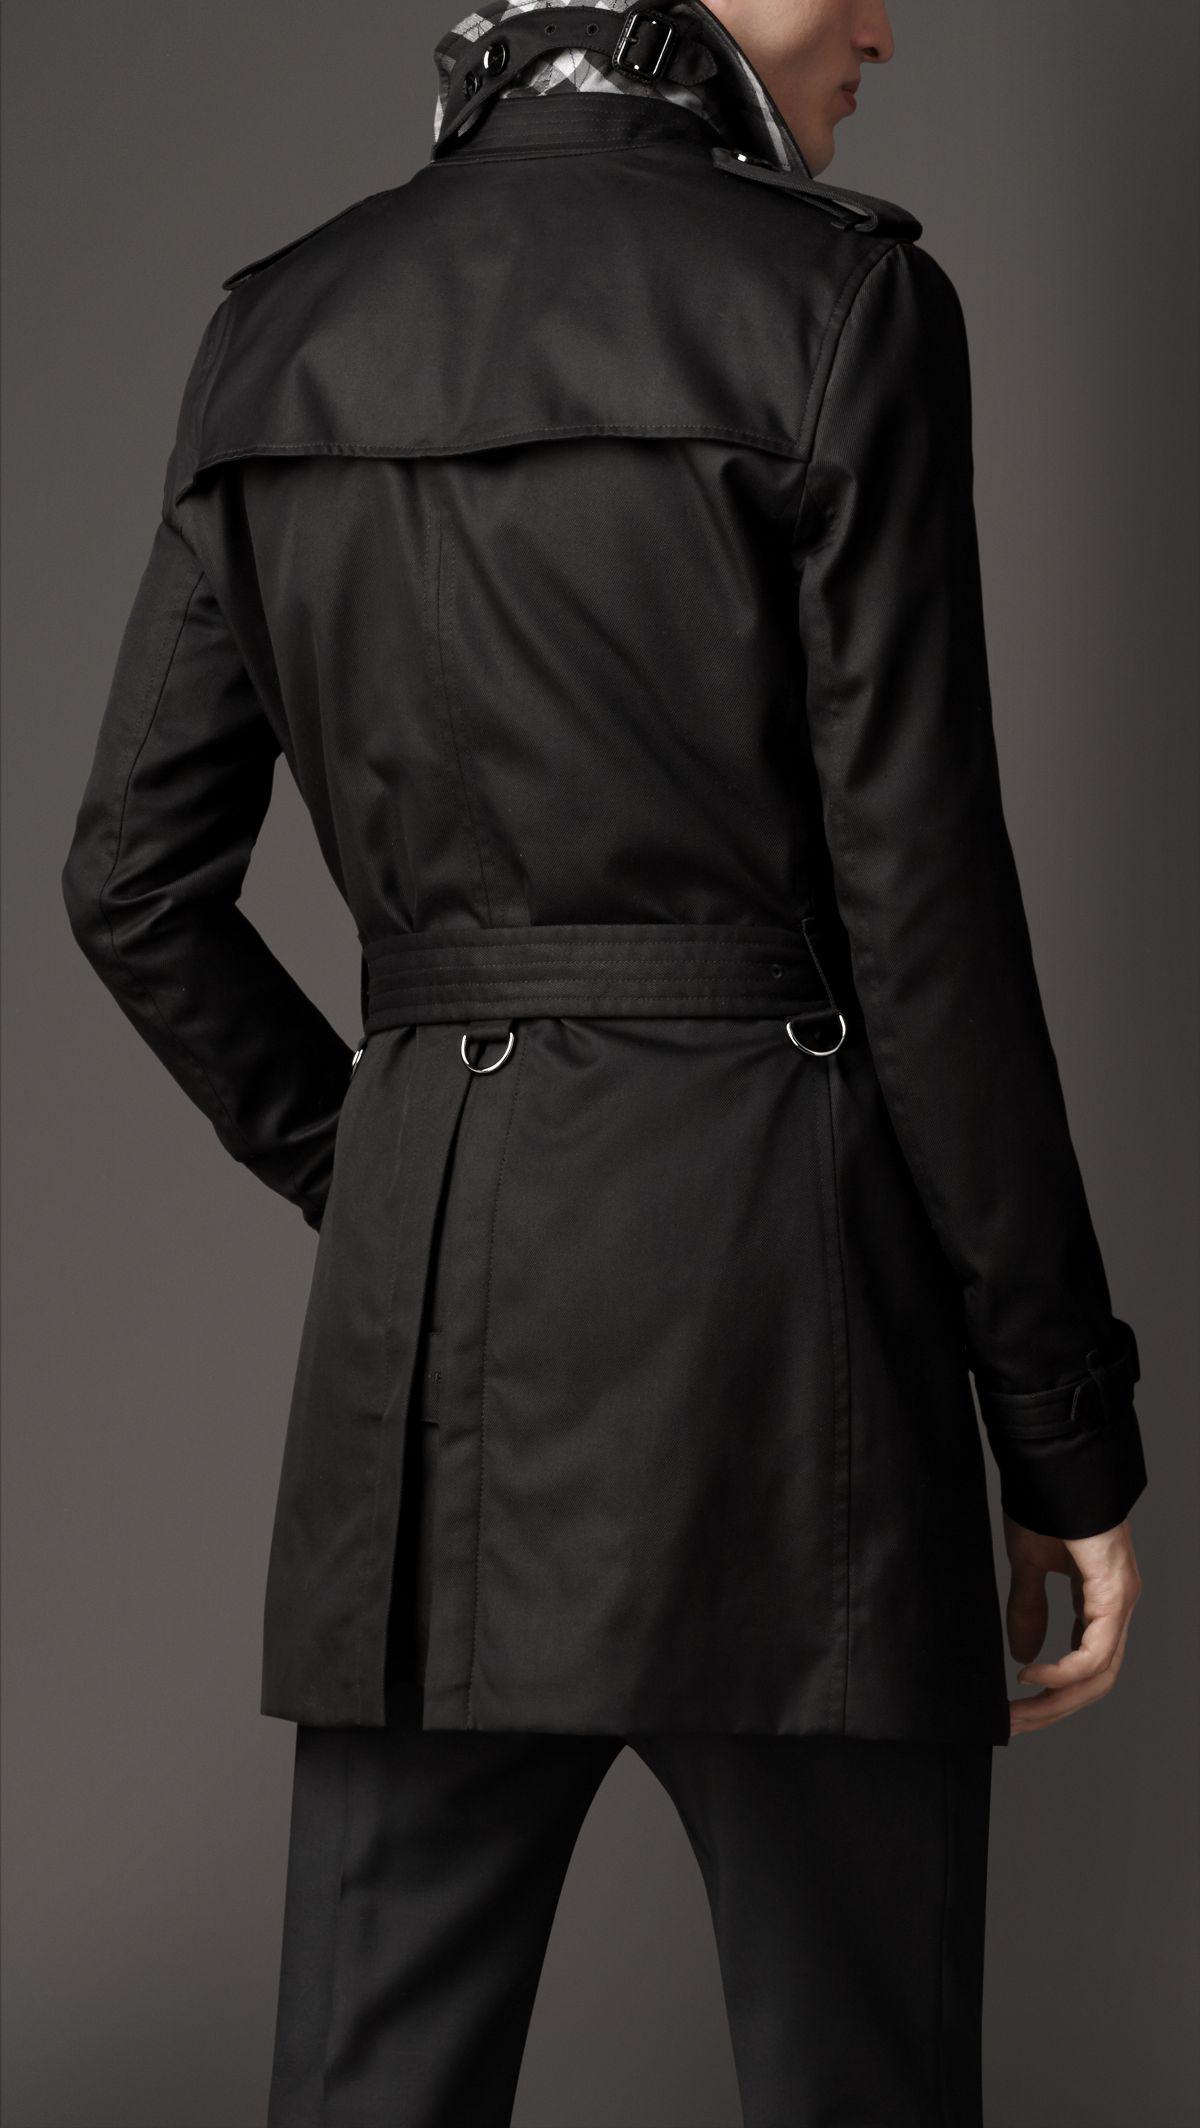 Burberry Mid-length Technical Cotton Trench Coat in Black for Men - Lyst